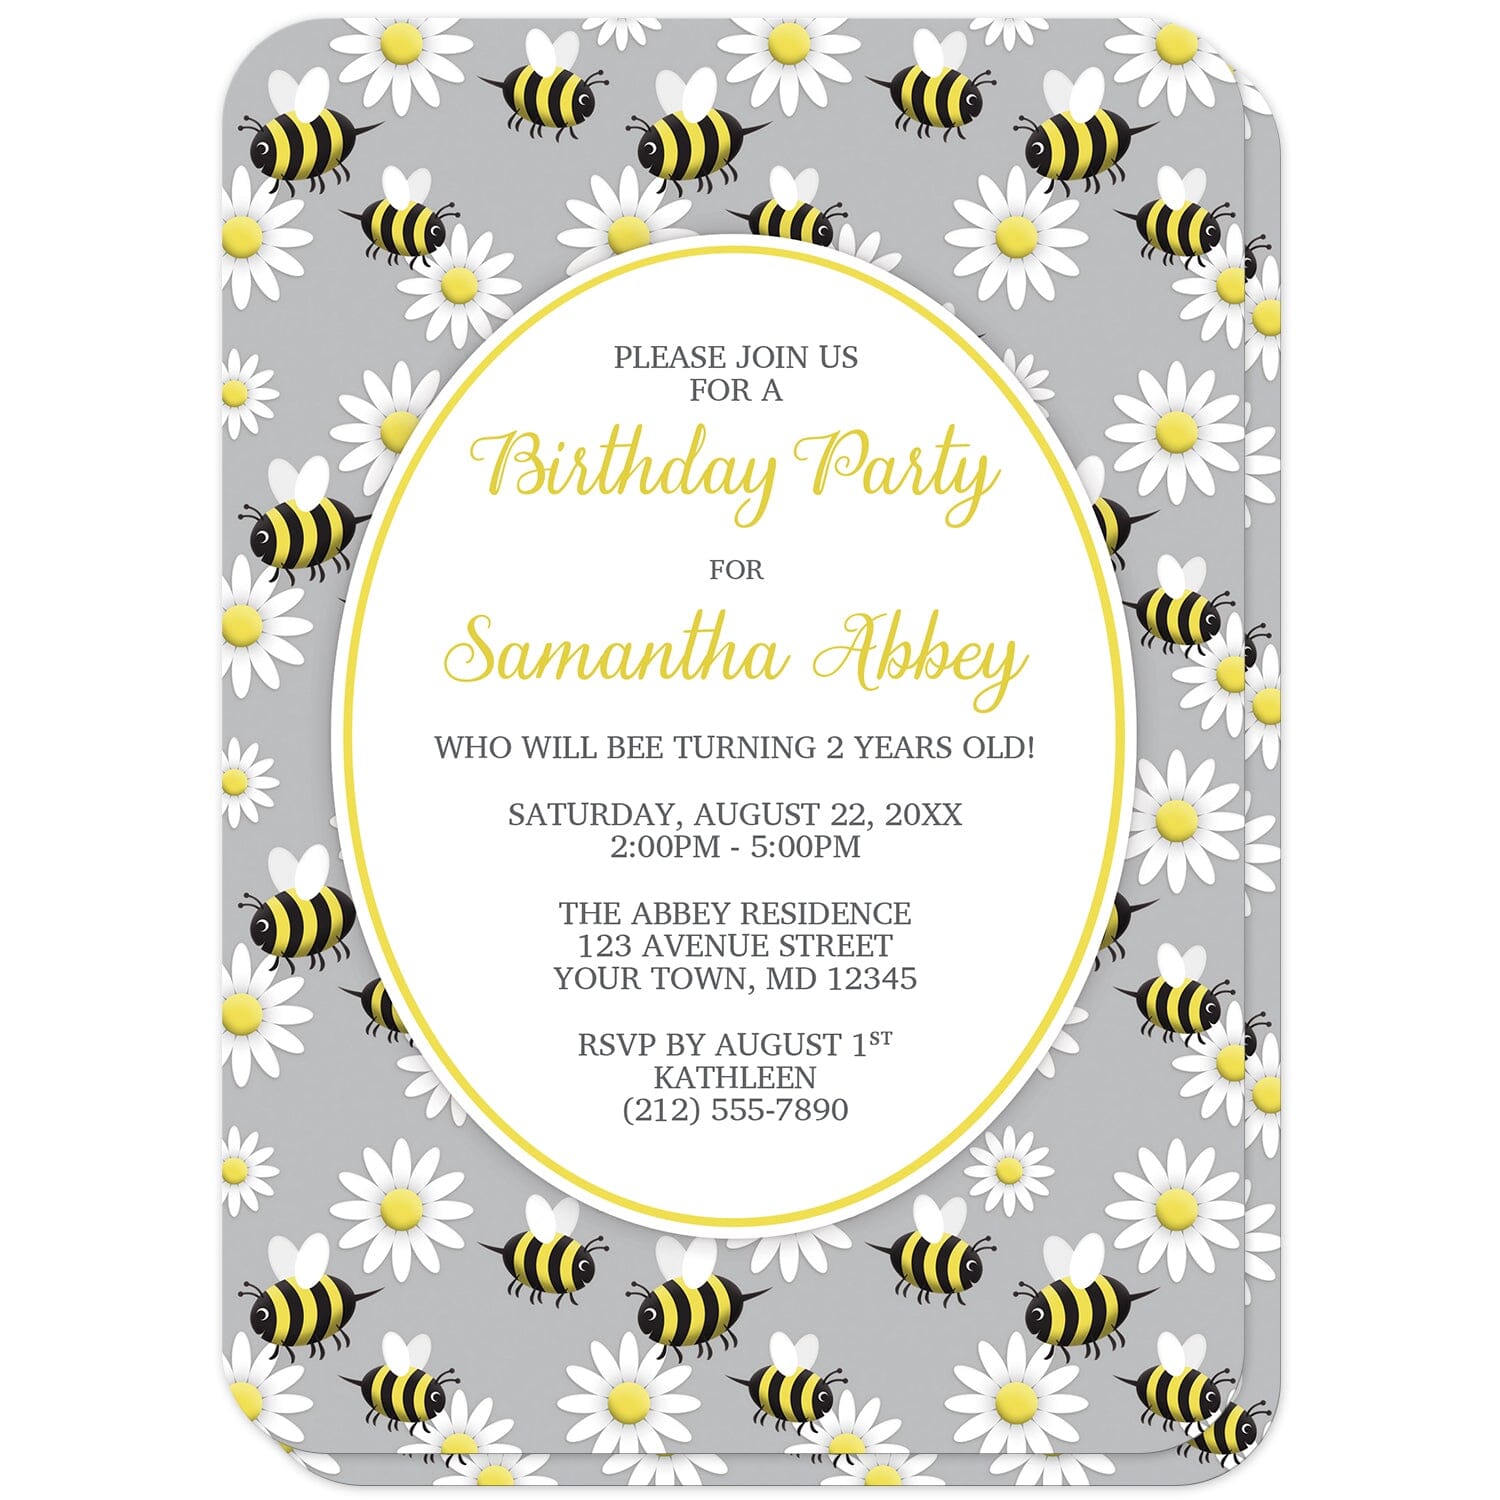 Happy Bee and Daisy Pattern Birthday Party Invitations (with rounded corners) at Artistically Invited. Happy bee and daisy pattern birthday party invitations with a background featuring a pattern of a yellow and black happy bees and white daisy flowers over gray. Your personalized birthday party details are custom printed in yellow and dark gray in a white oval outlined in yellow in the center.